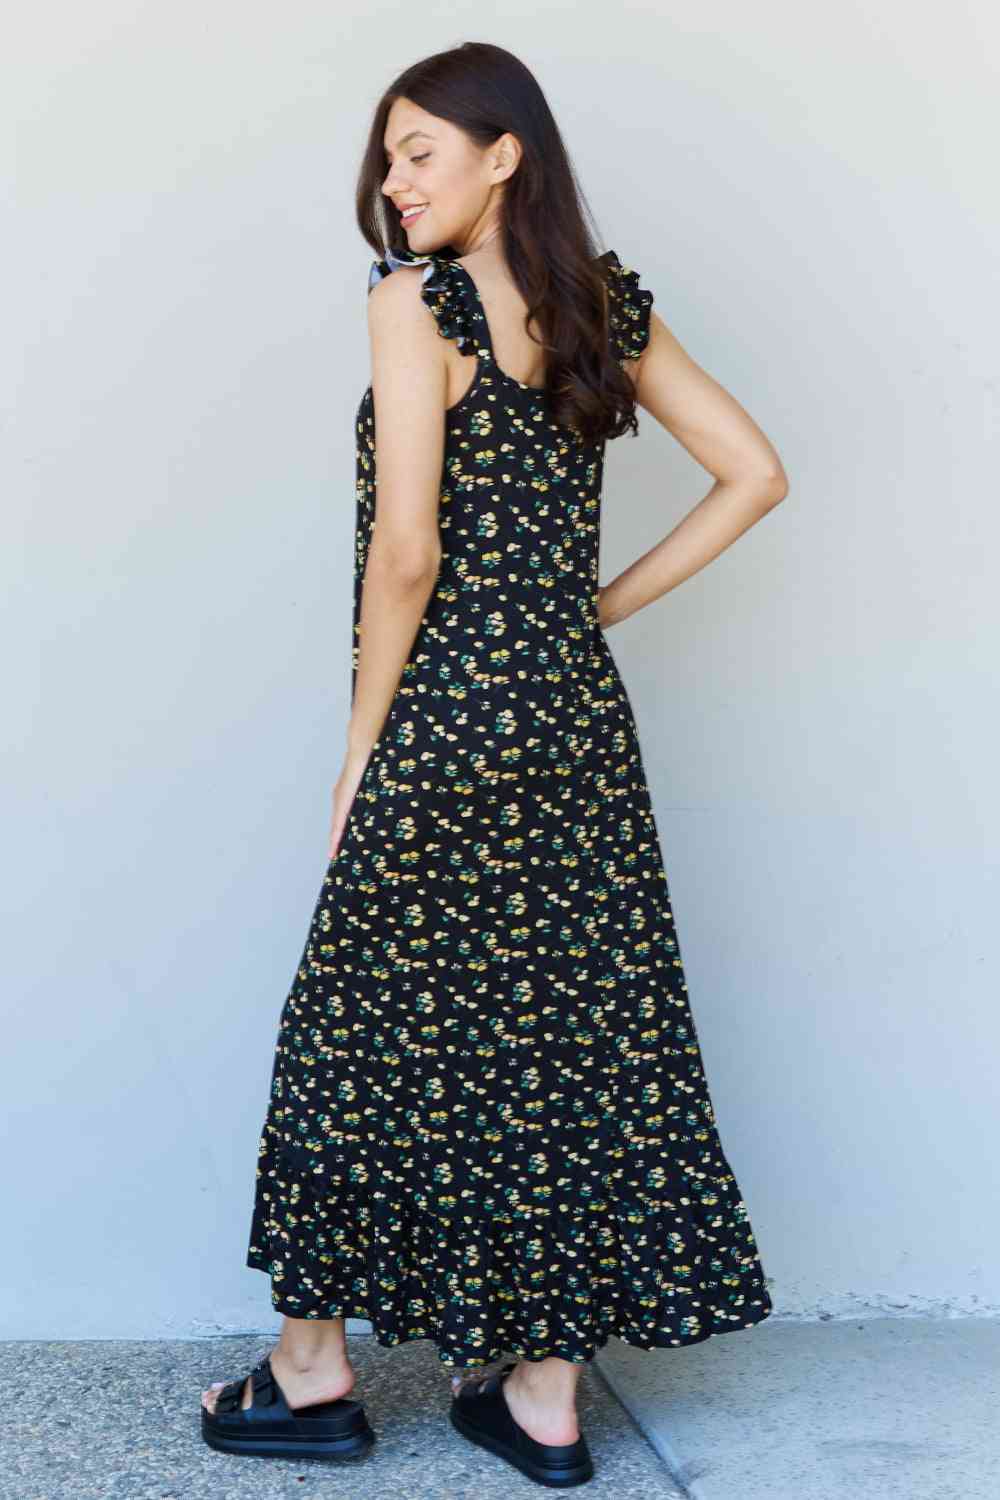 Doublju In The Garden Ruffle Floral Maxi Dress in  Black Yellow Floral Print on any thing USA/STOD clothes